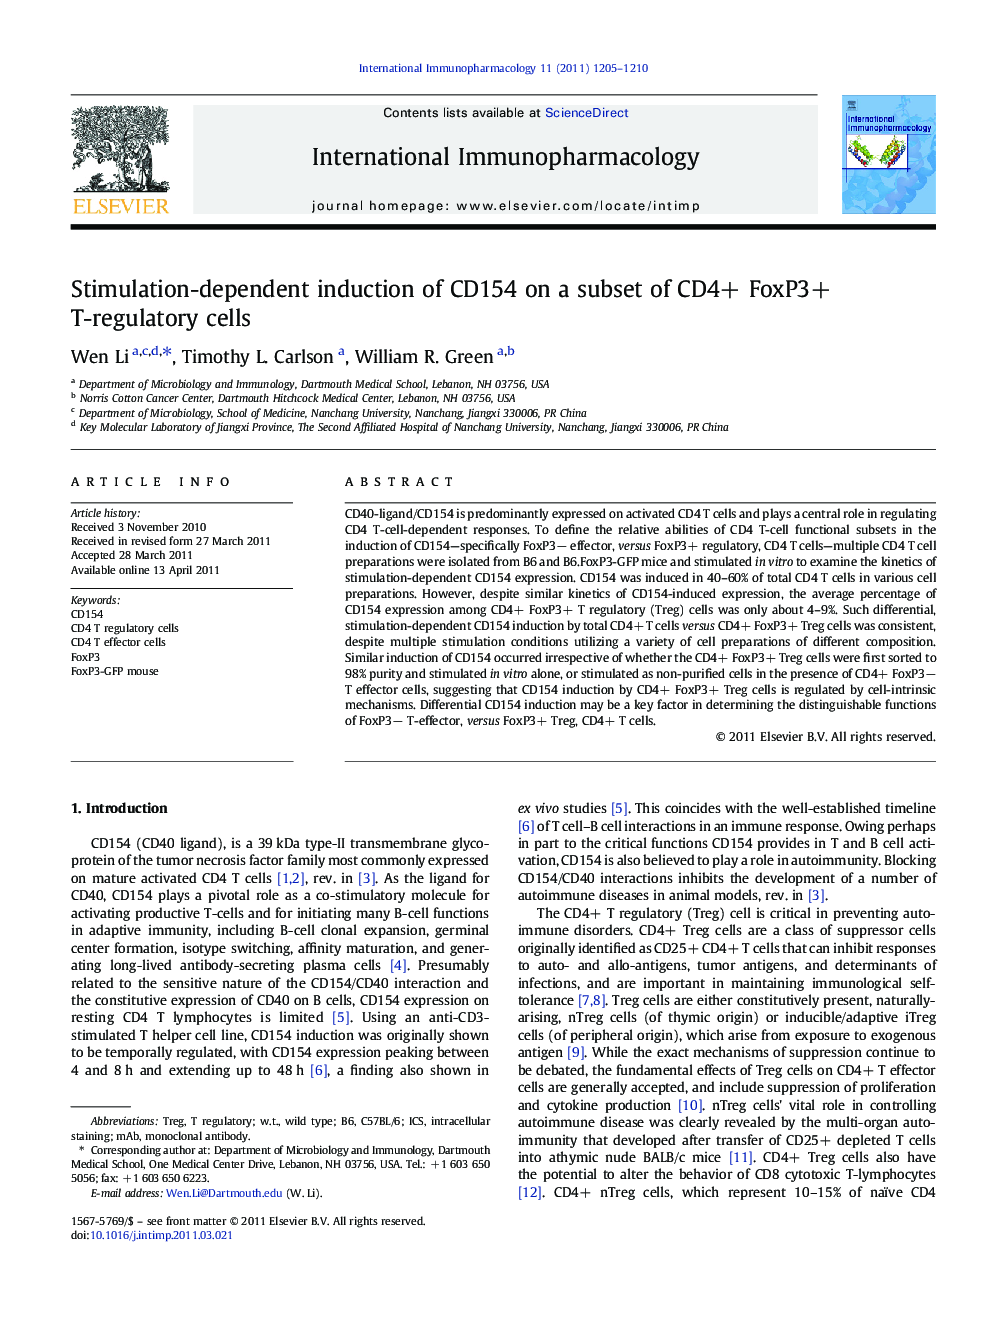 Stimulation-dependent induction of CD154 on a subset of CD4+ FoxP3+ T-regulatory cells